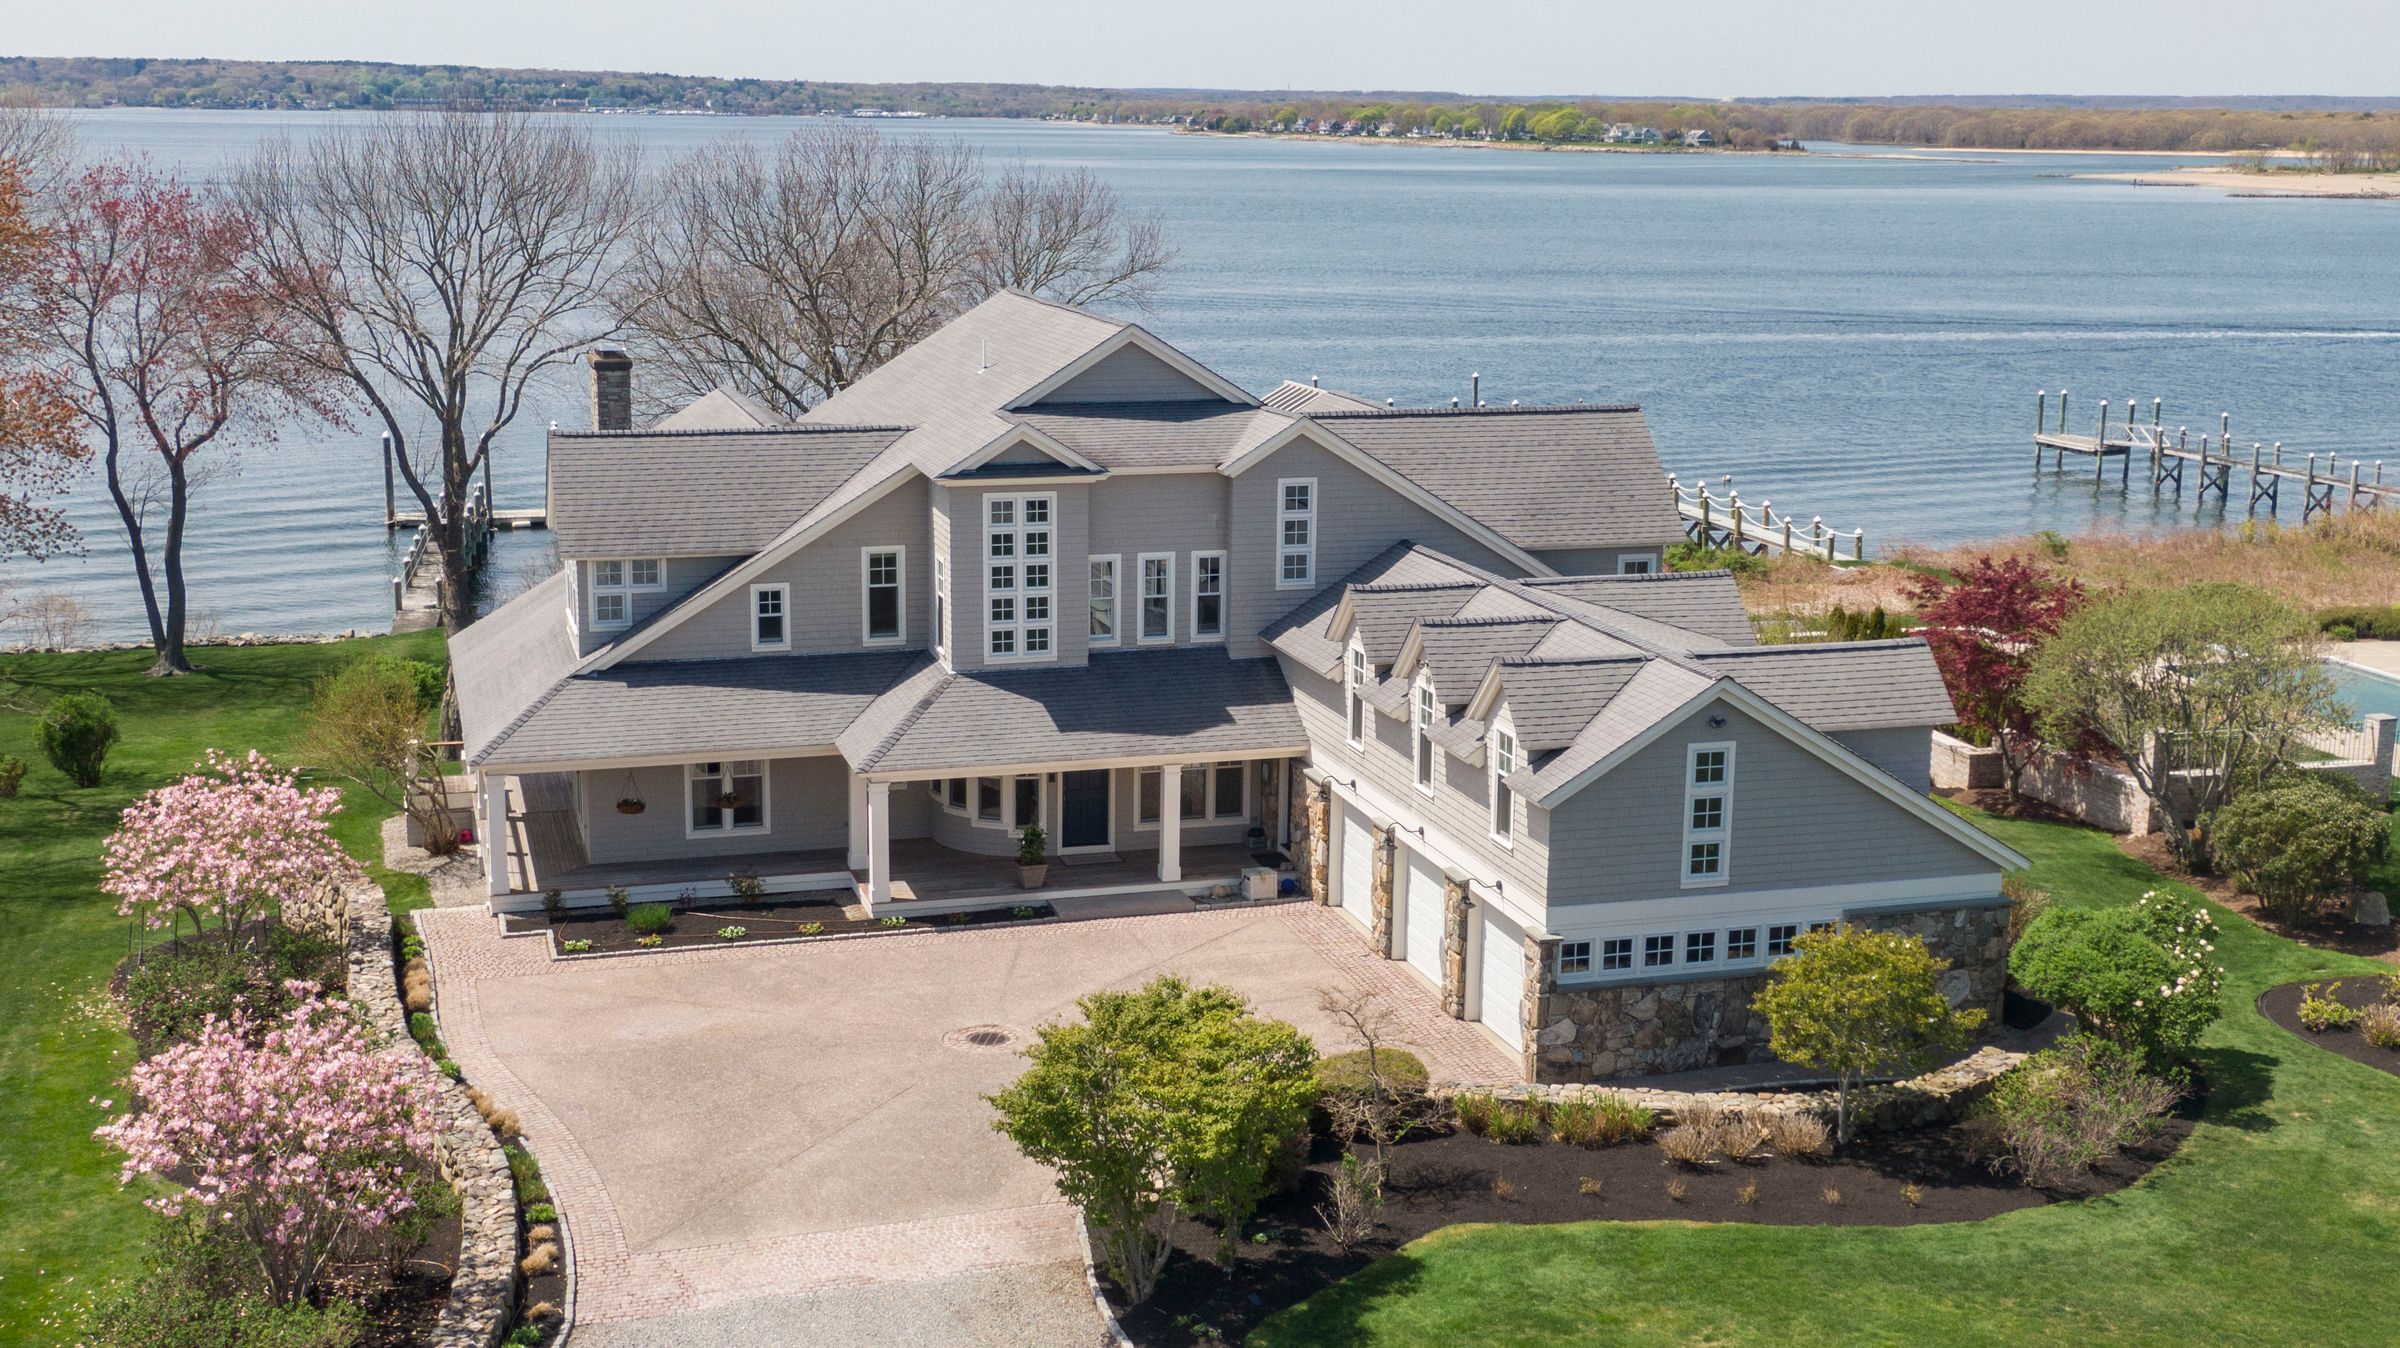 LILA DELMAN COMPASS SETS RECORD FOR HIGHEST HOME SALE IN WARWICK HISTORY